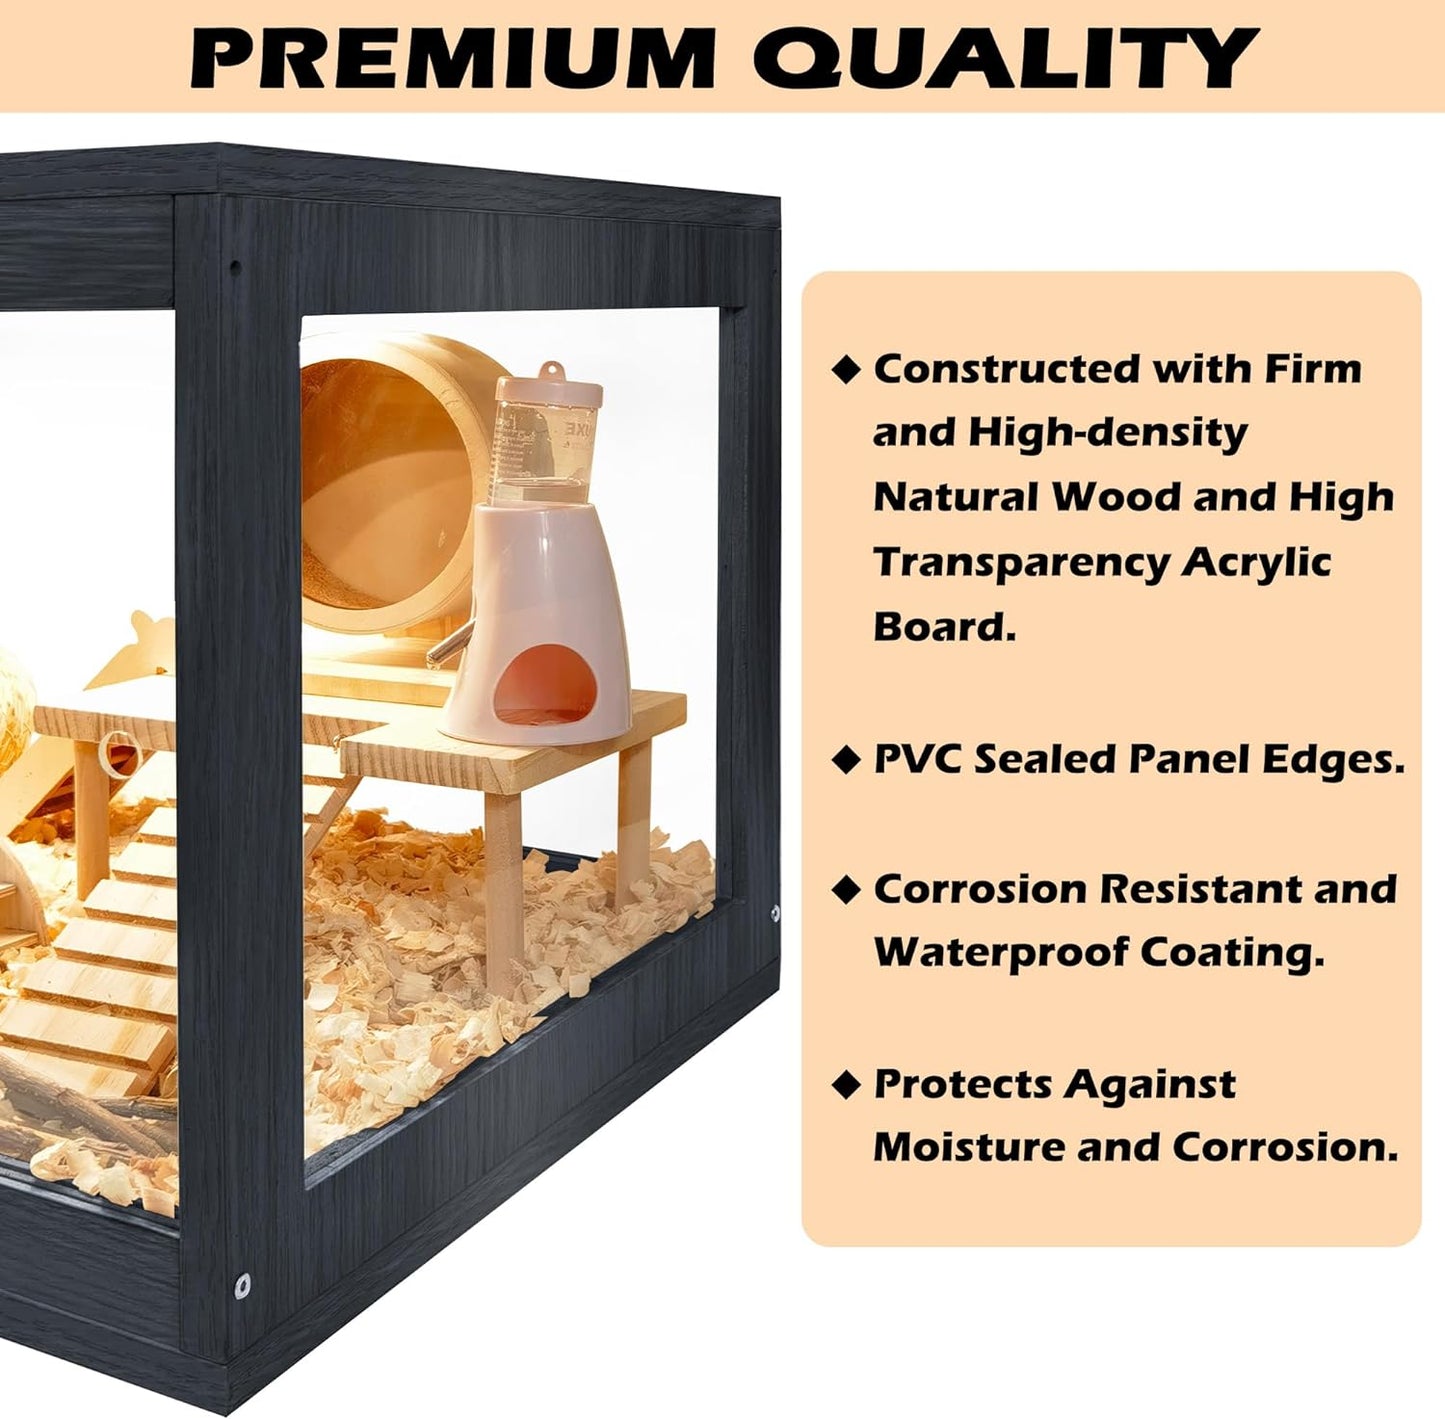 Prolee Hamster Cage Wooden 32 Inch Mice and Rat Habitat Openable Top with Acrylic Sheets Solid Built with Lock Design, Bl